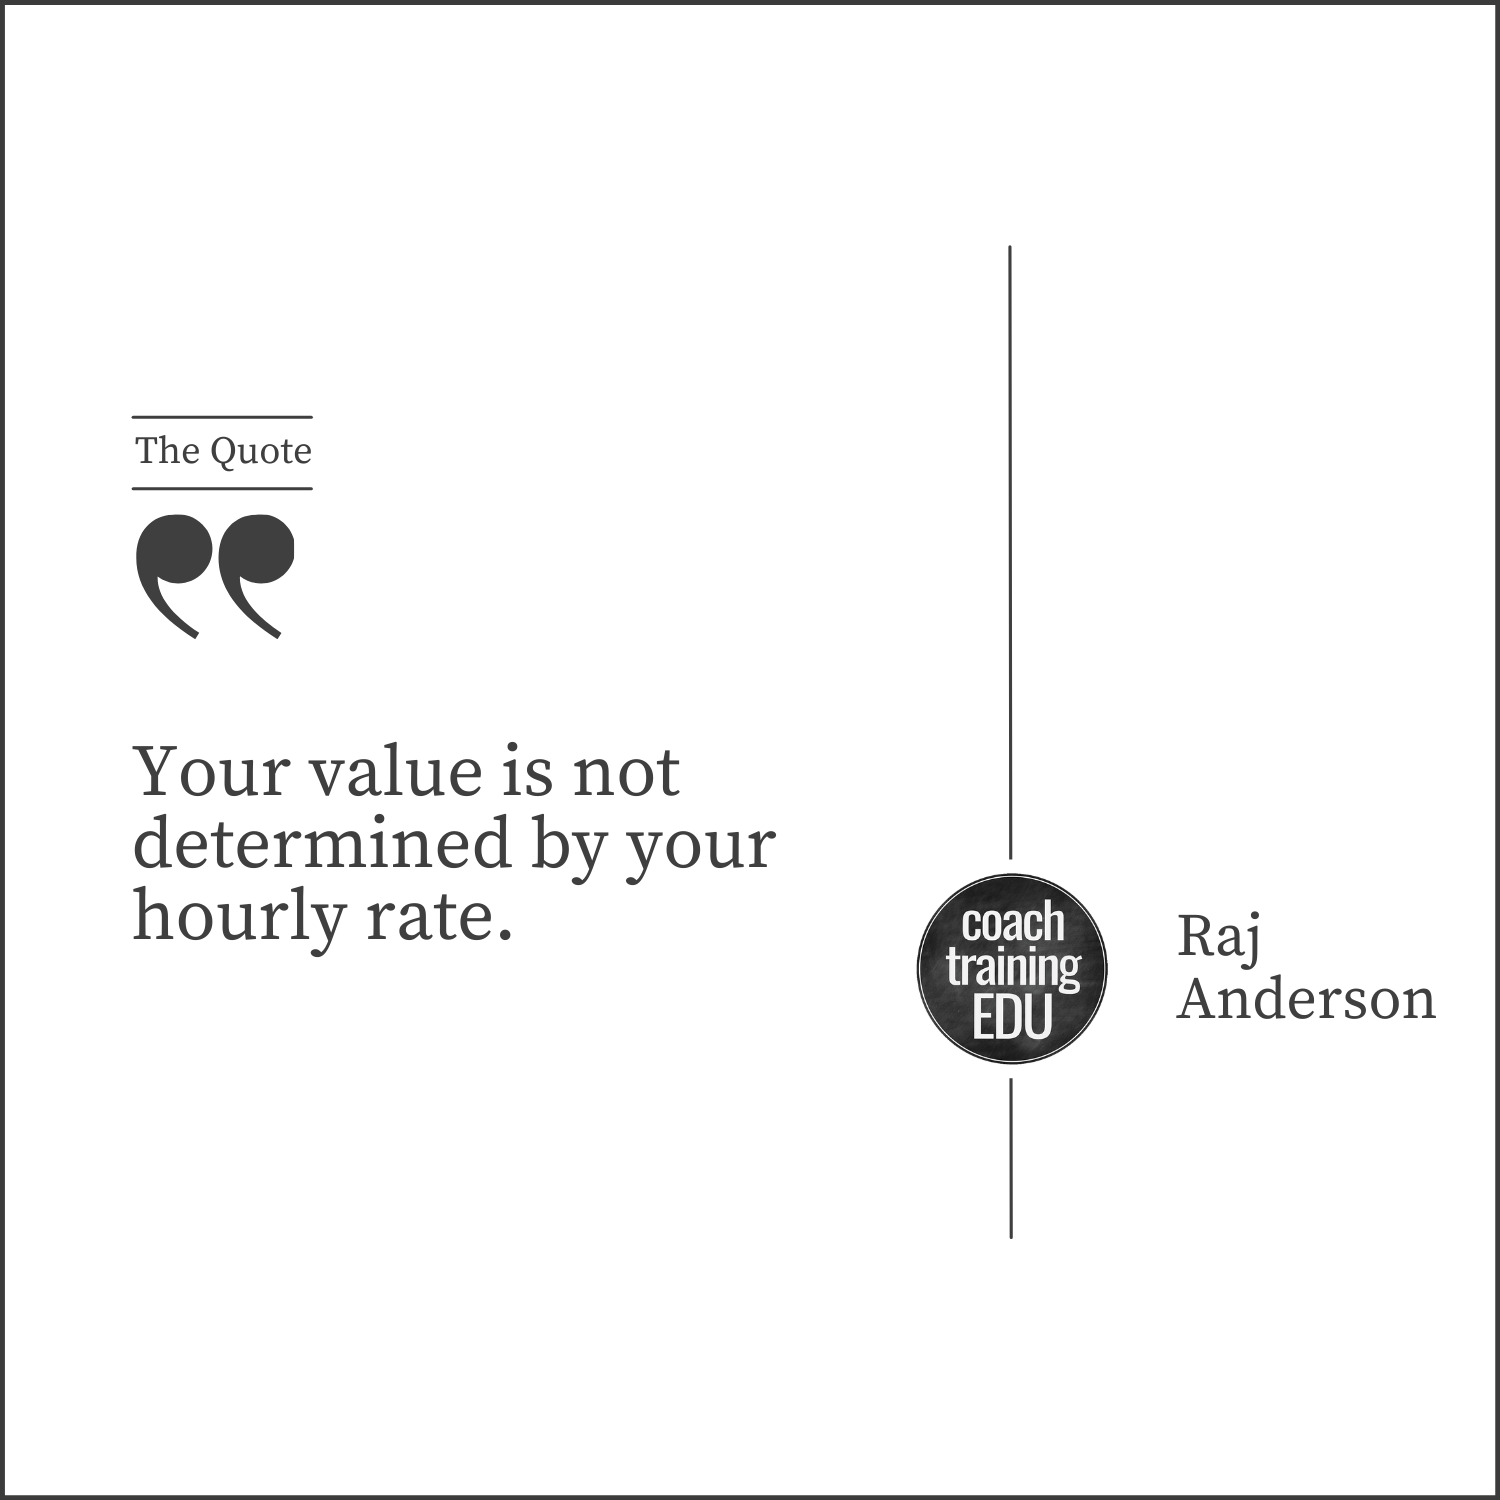 Your value is not determined by your hourly rate.